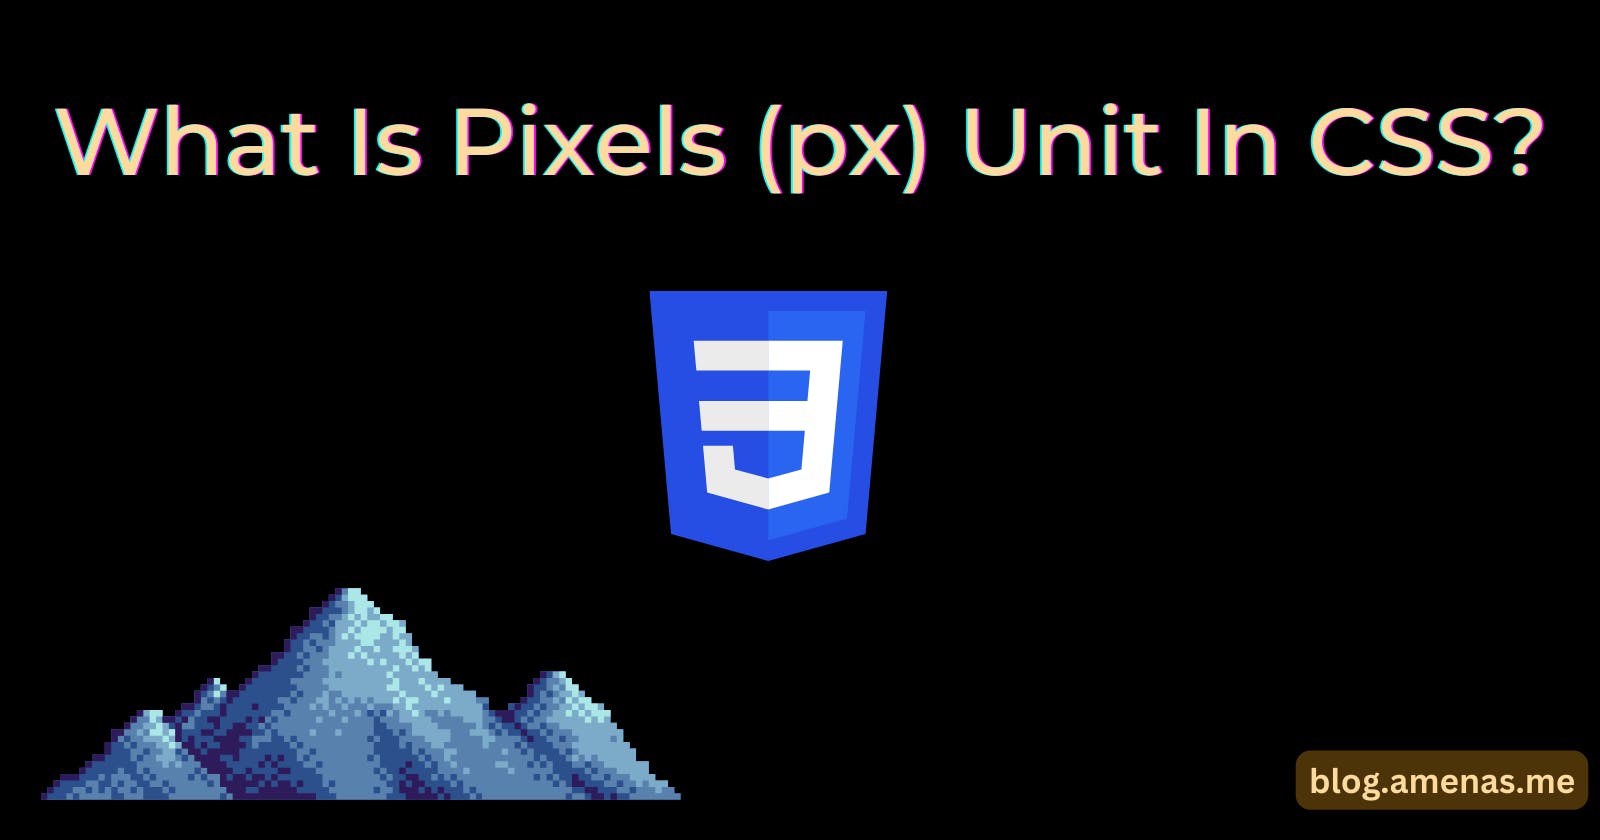 Let's Learn About Pixels (px) Unit In CSS